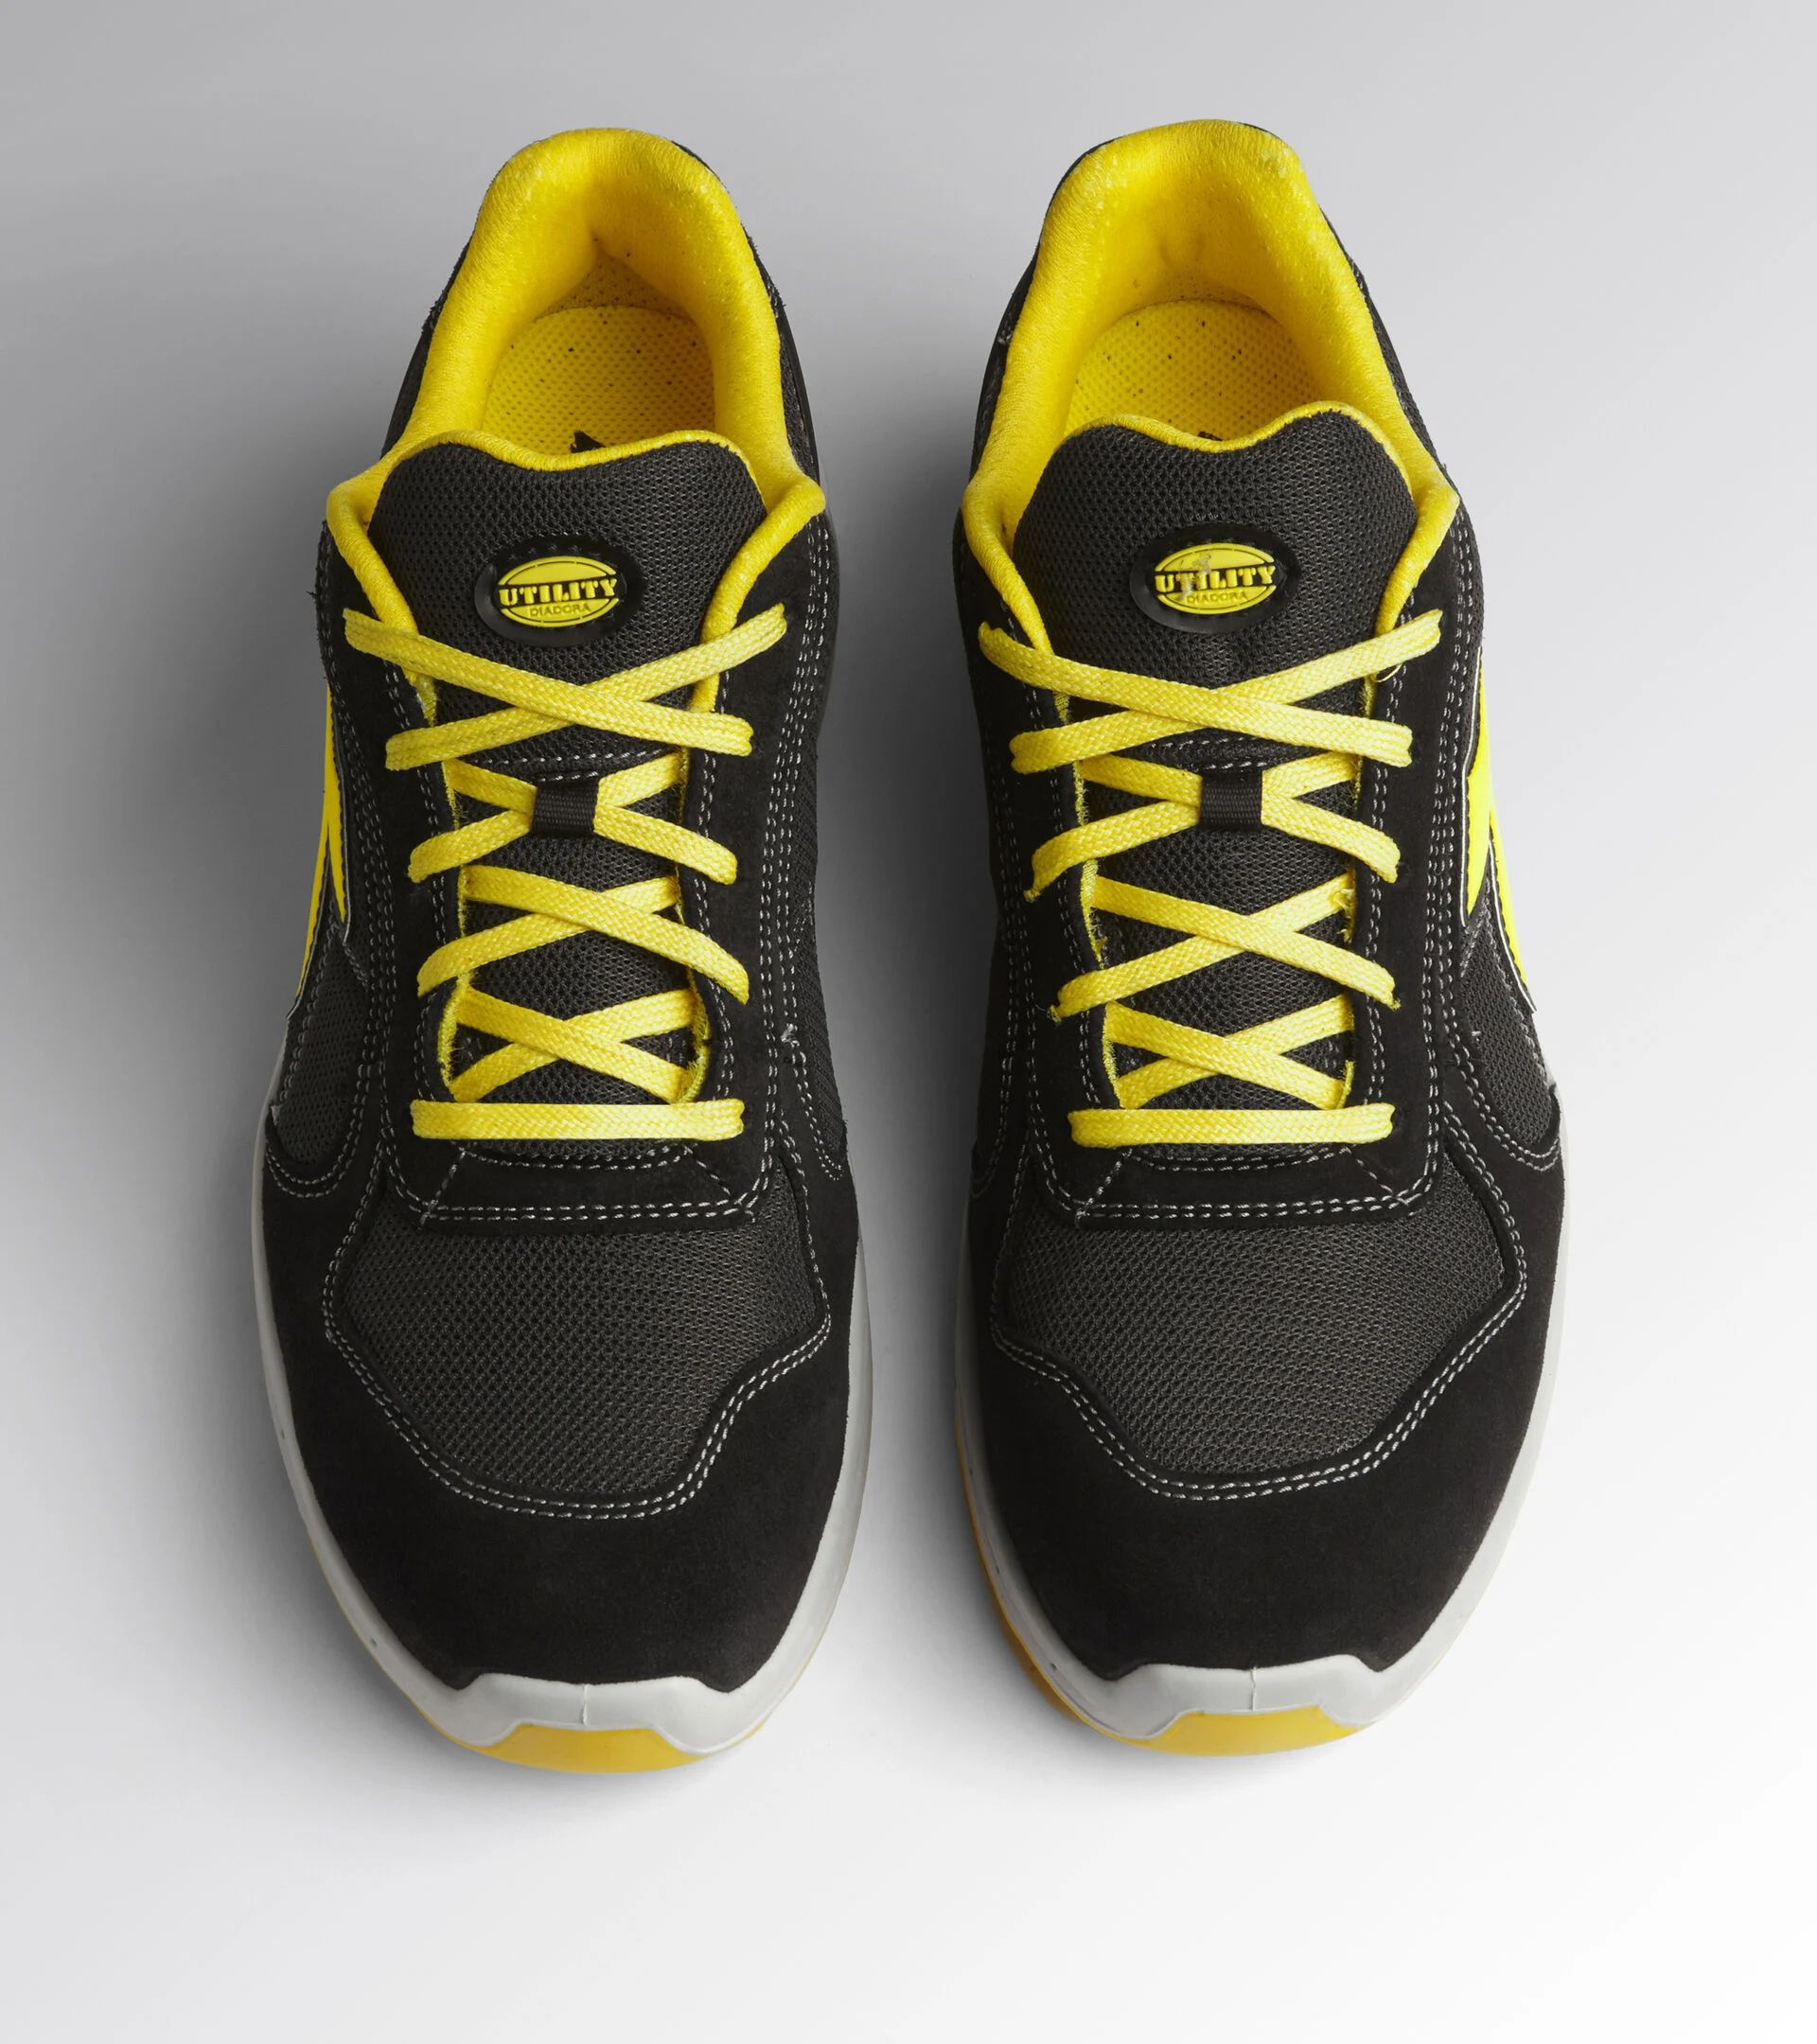 Run Net Airbox safety shoes